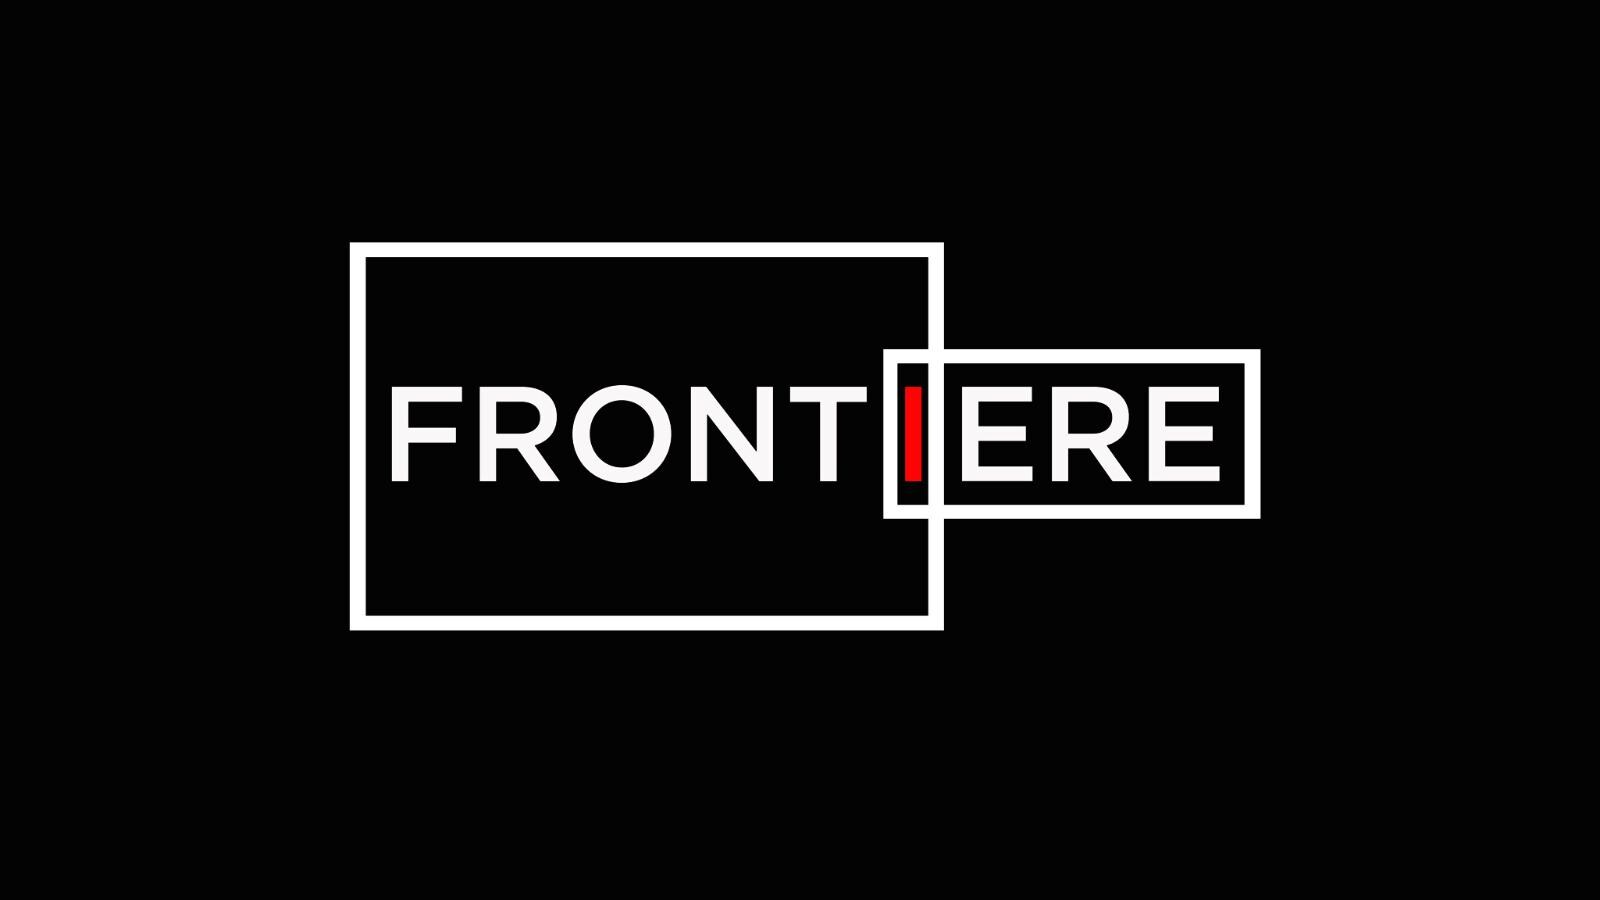 frontiere